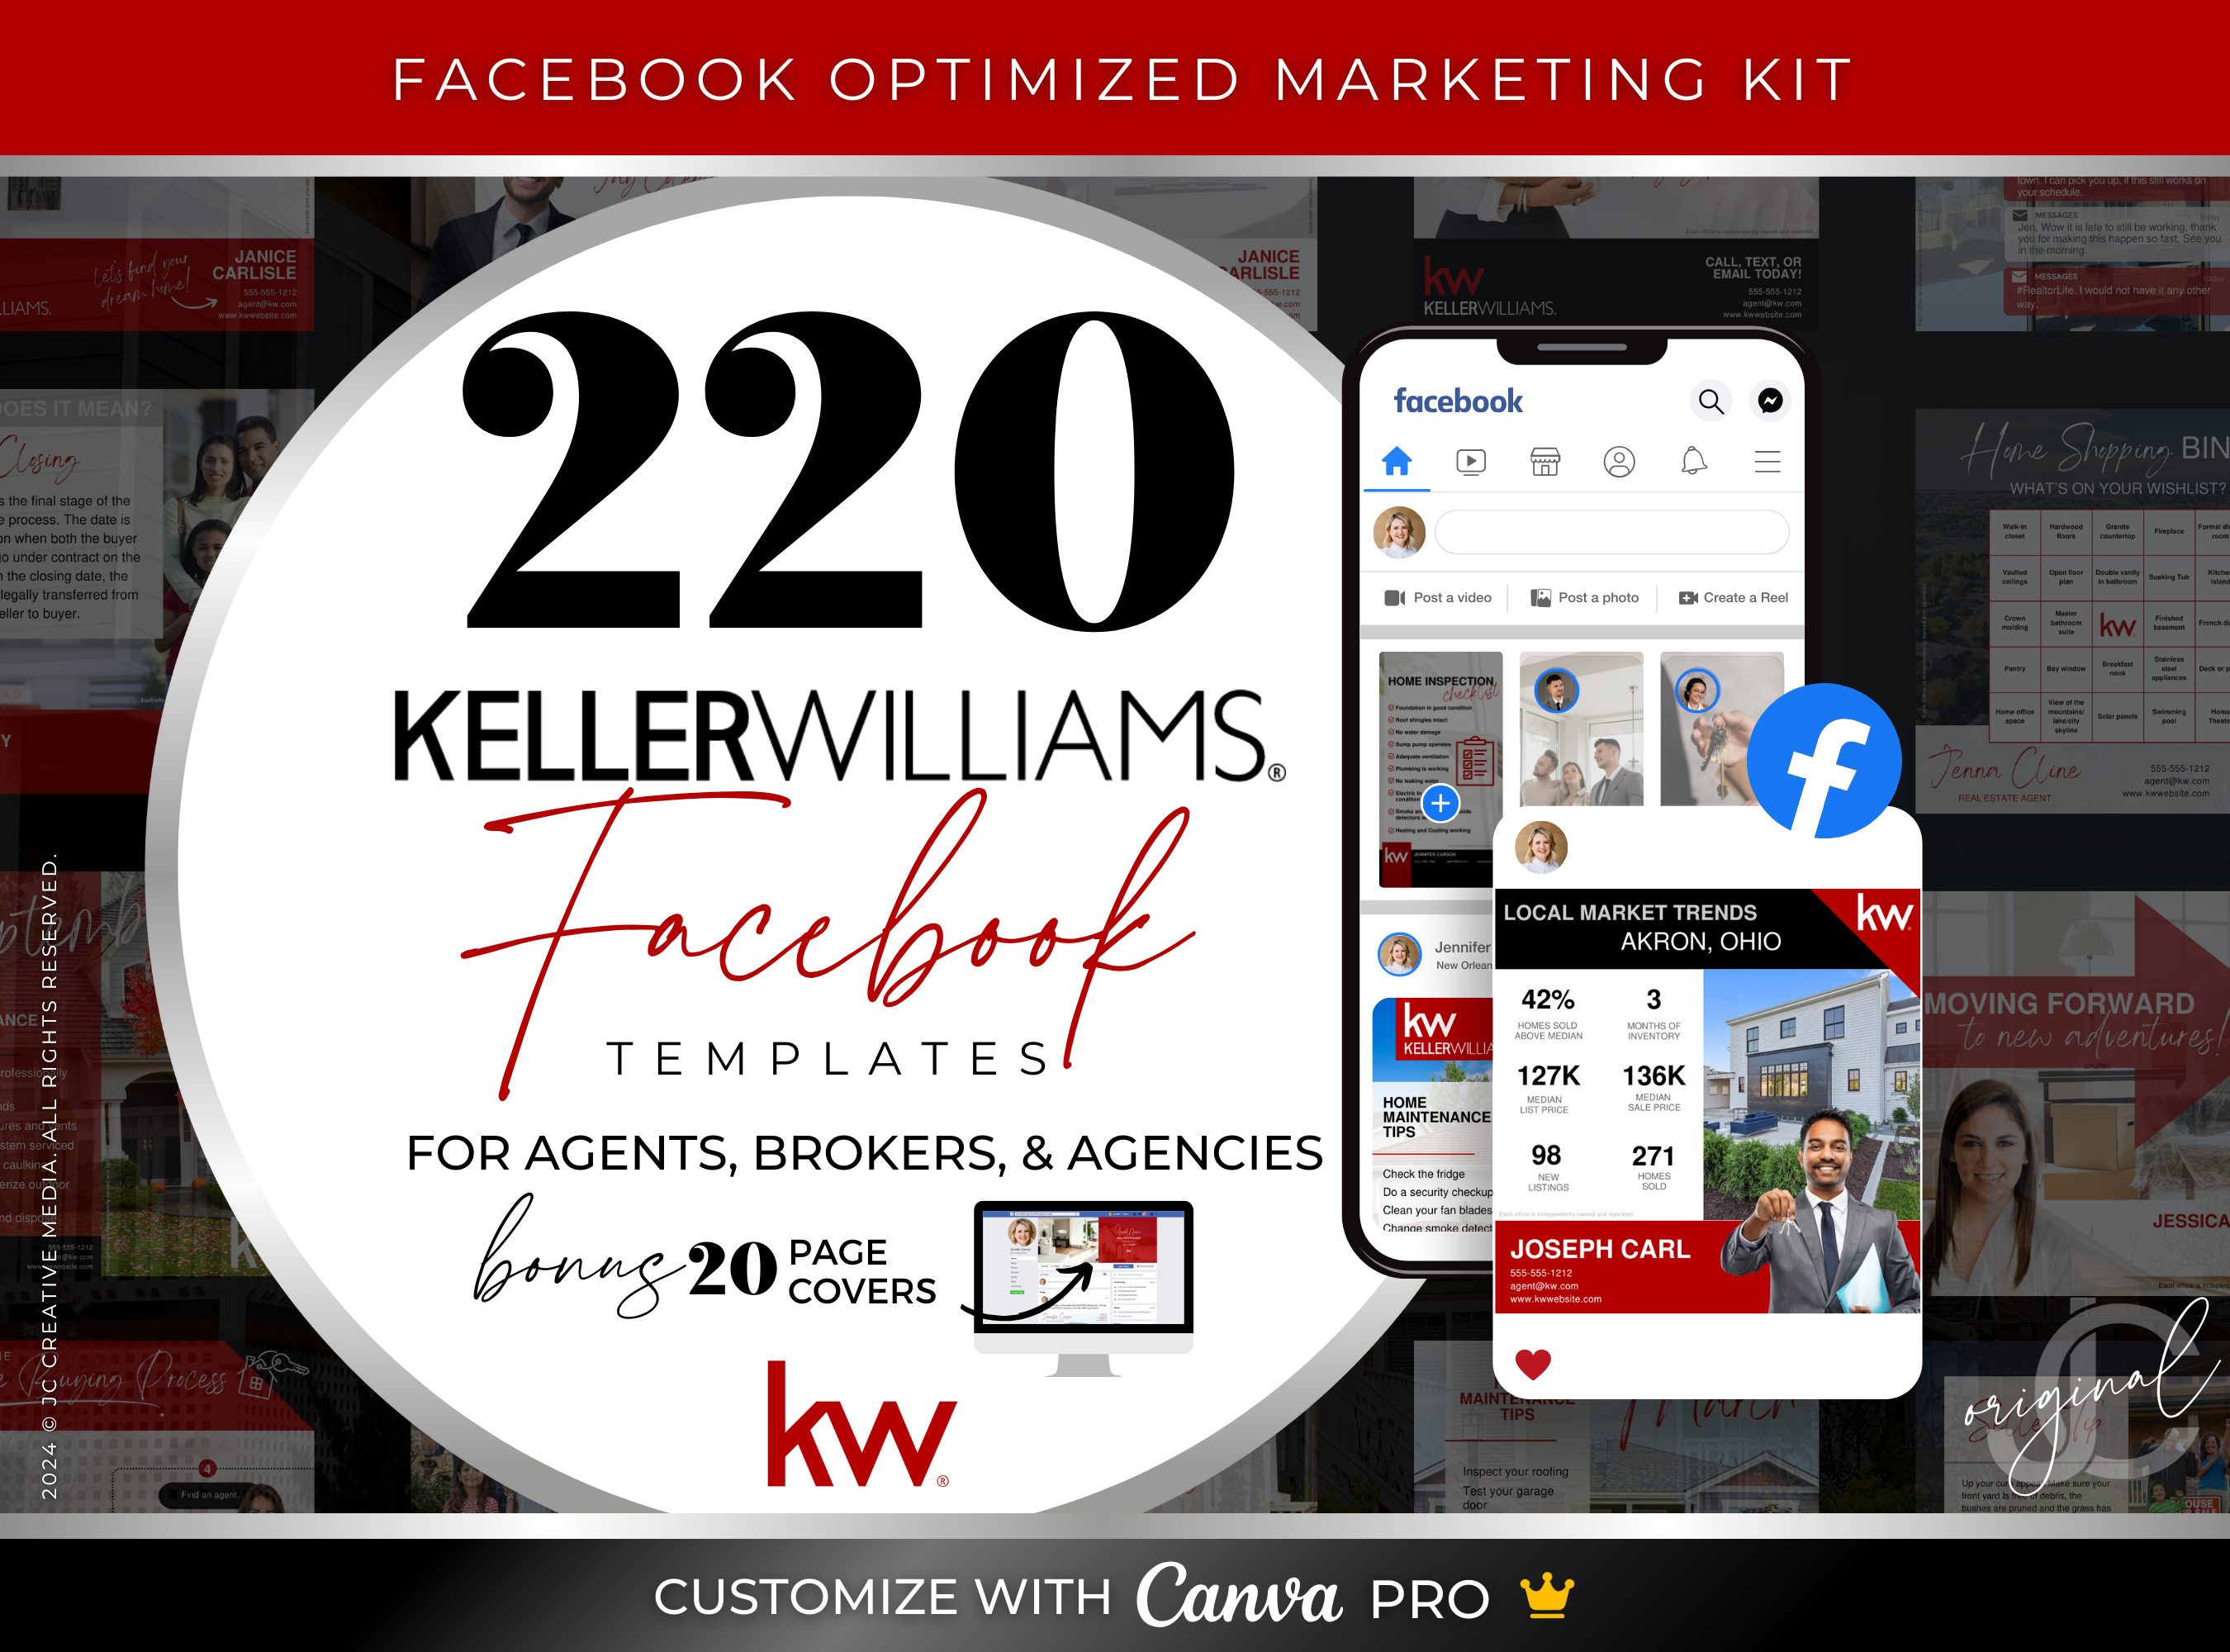 Keller Williams KW Canva templates for realtors, real estate agents, brokers, and agencies. Social media or Facebook marketing and branding templates.